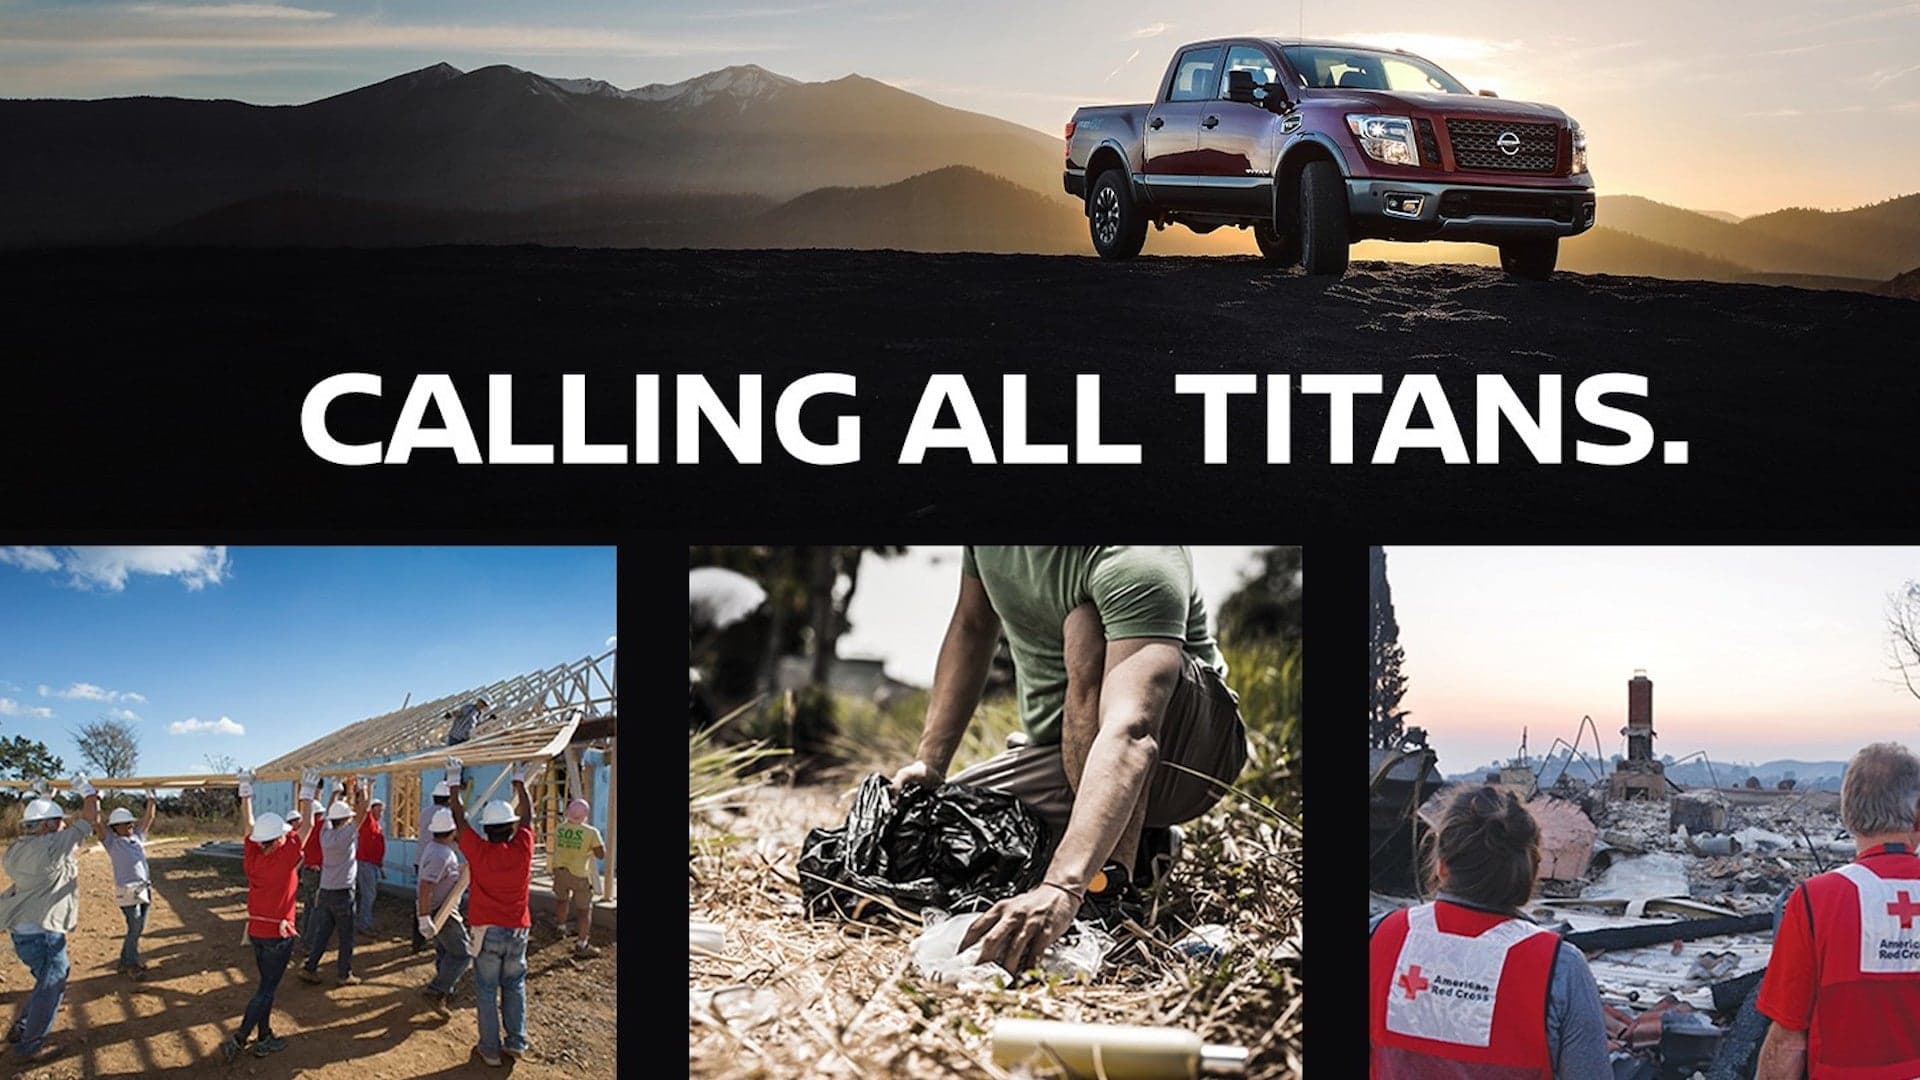 Nissan Evokes the Spirit of Goodwill With ‘Calling All Titans’ Truck Campaign